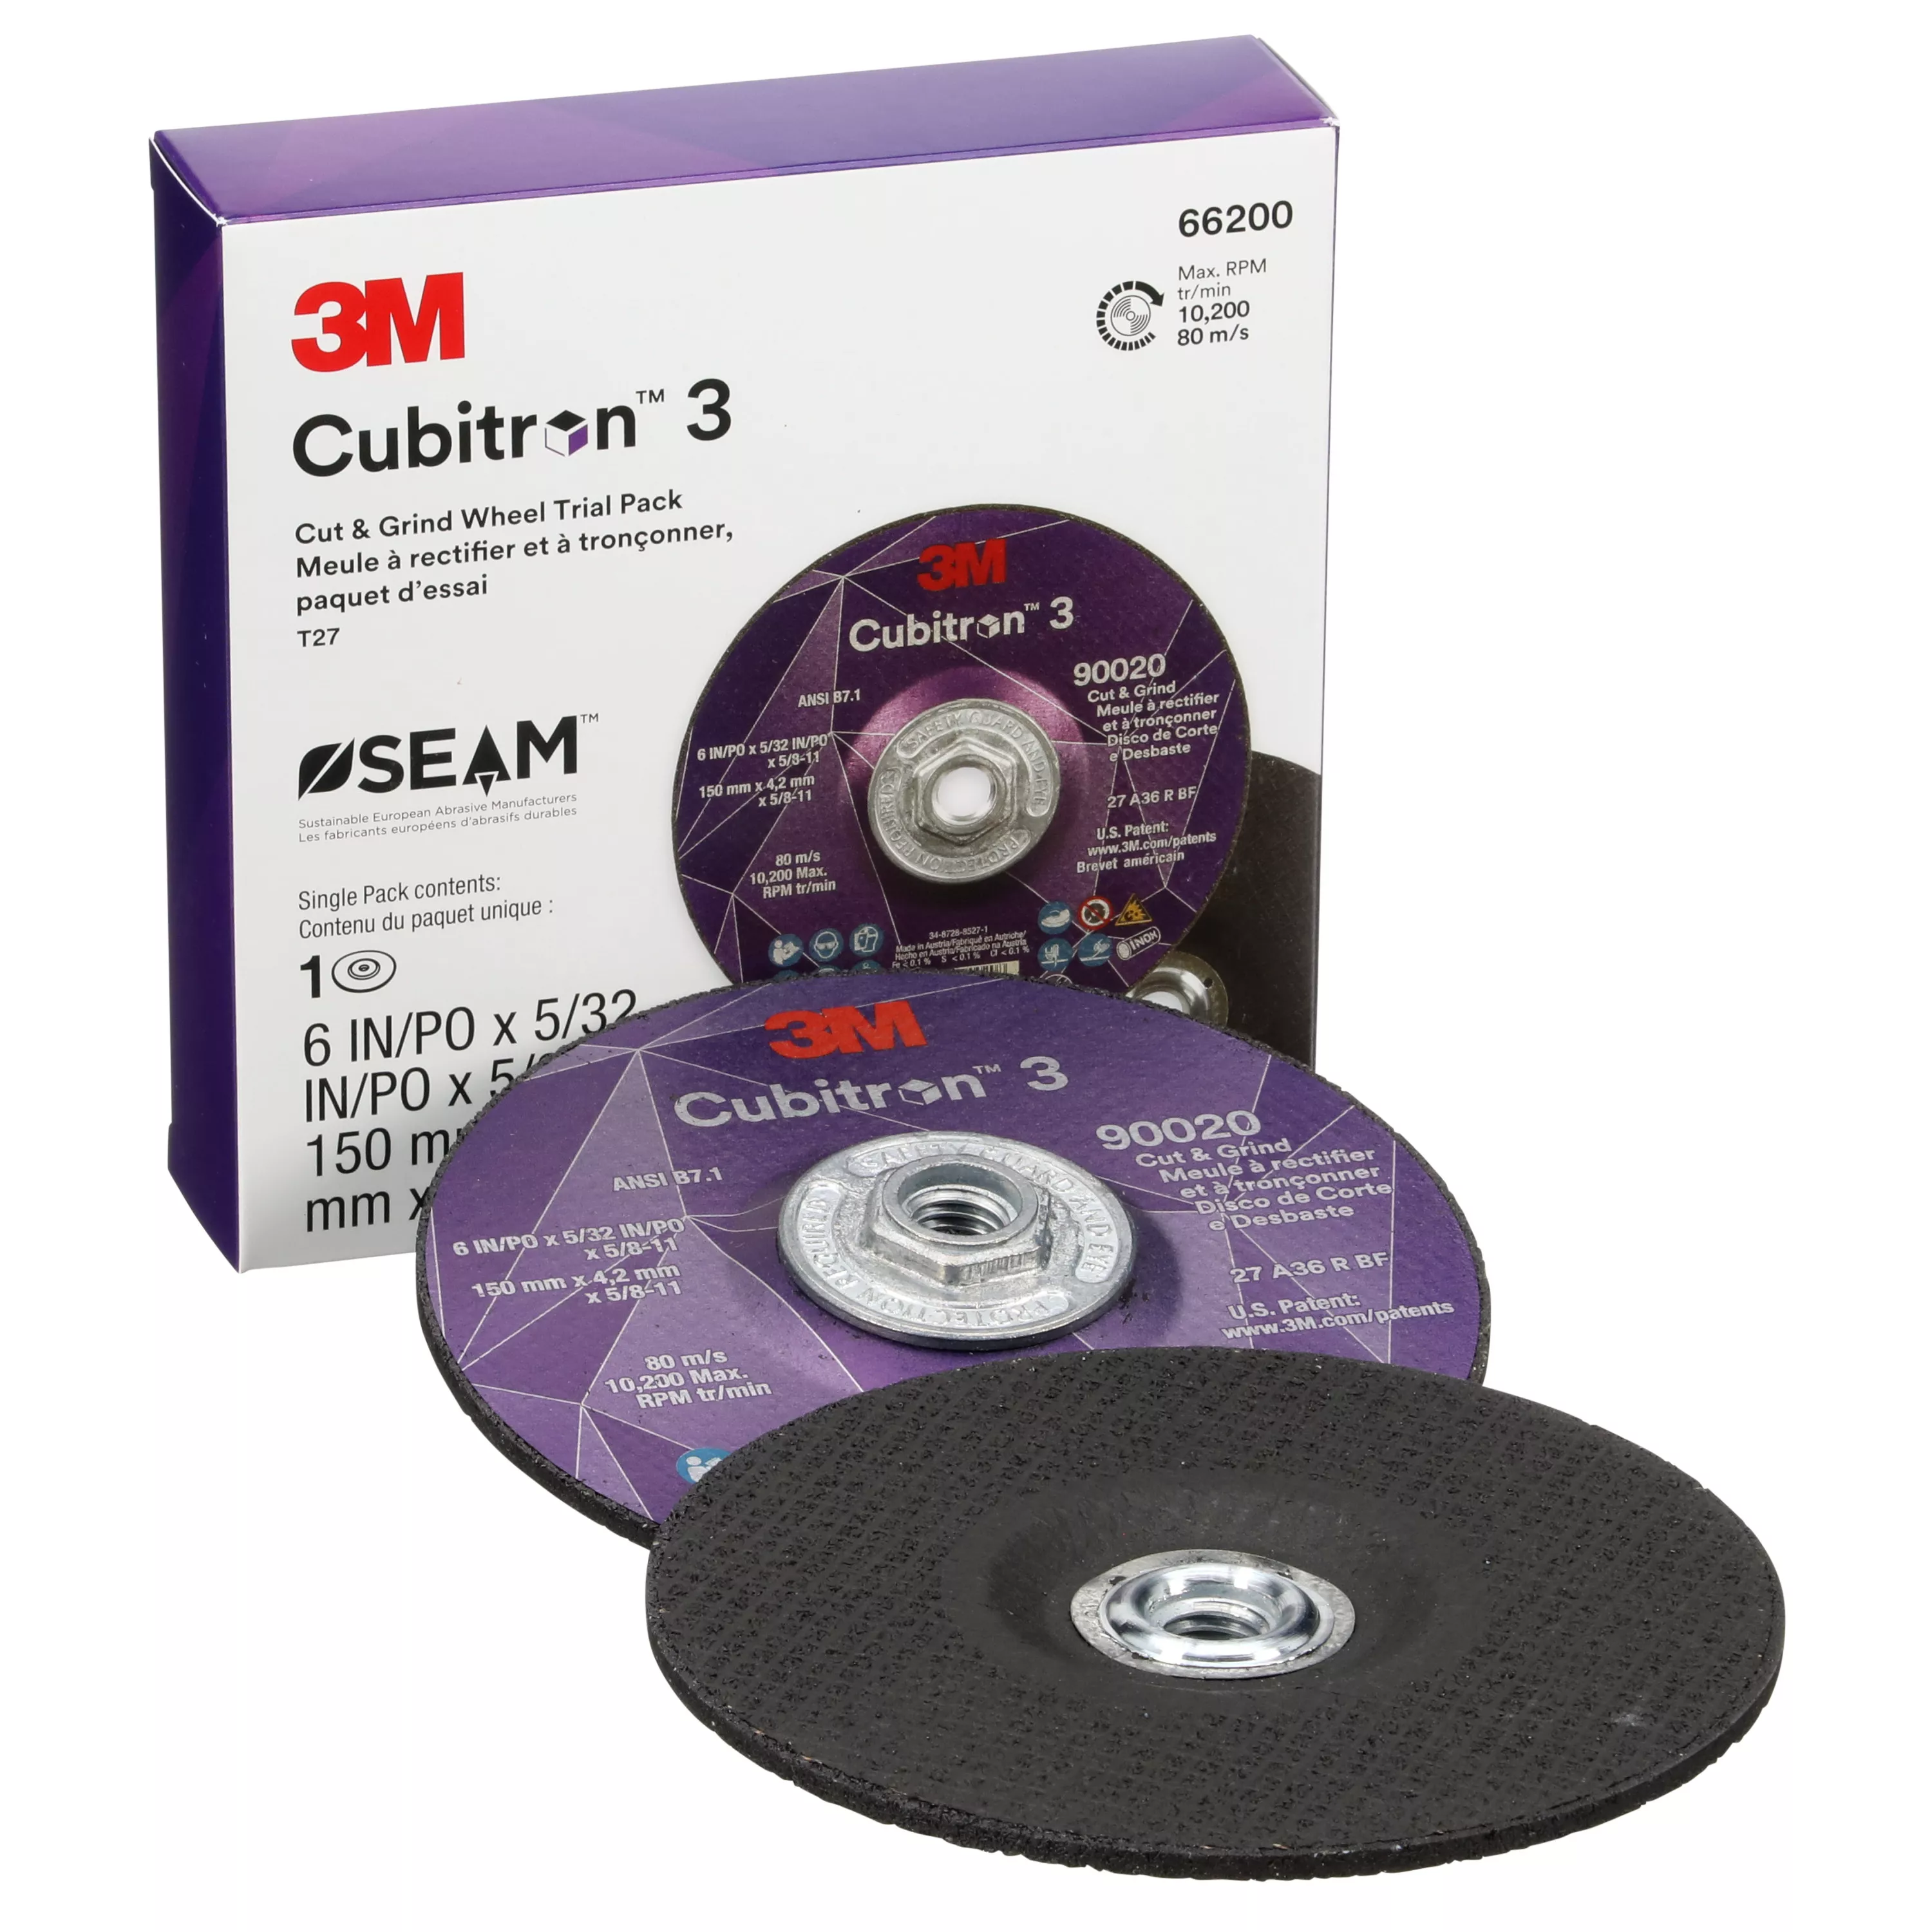 3M™ Cubitron™ 3 Cut and Grind Wheel, 66200, 36+, Type 27, 6 in x 5/32 in x 5/8 in-11 (150mmx4.2mm), ANSI, 10 ea/Case, Trial Pack